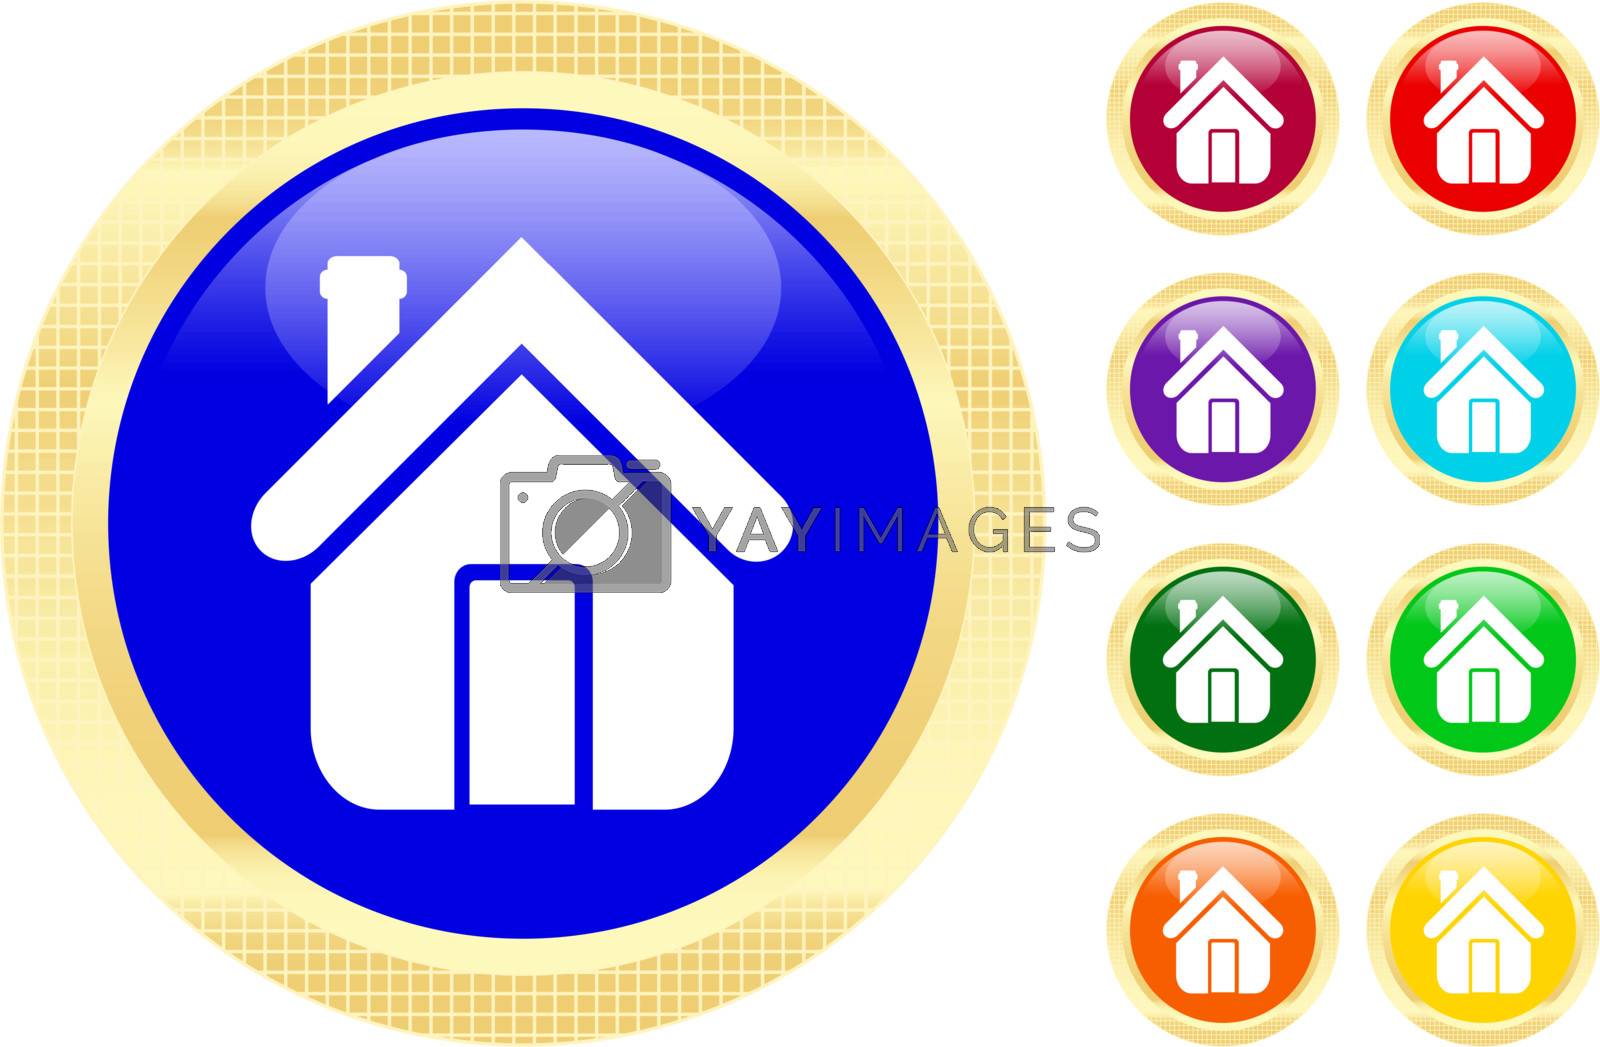 Royalty free image of House icon by Iglira